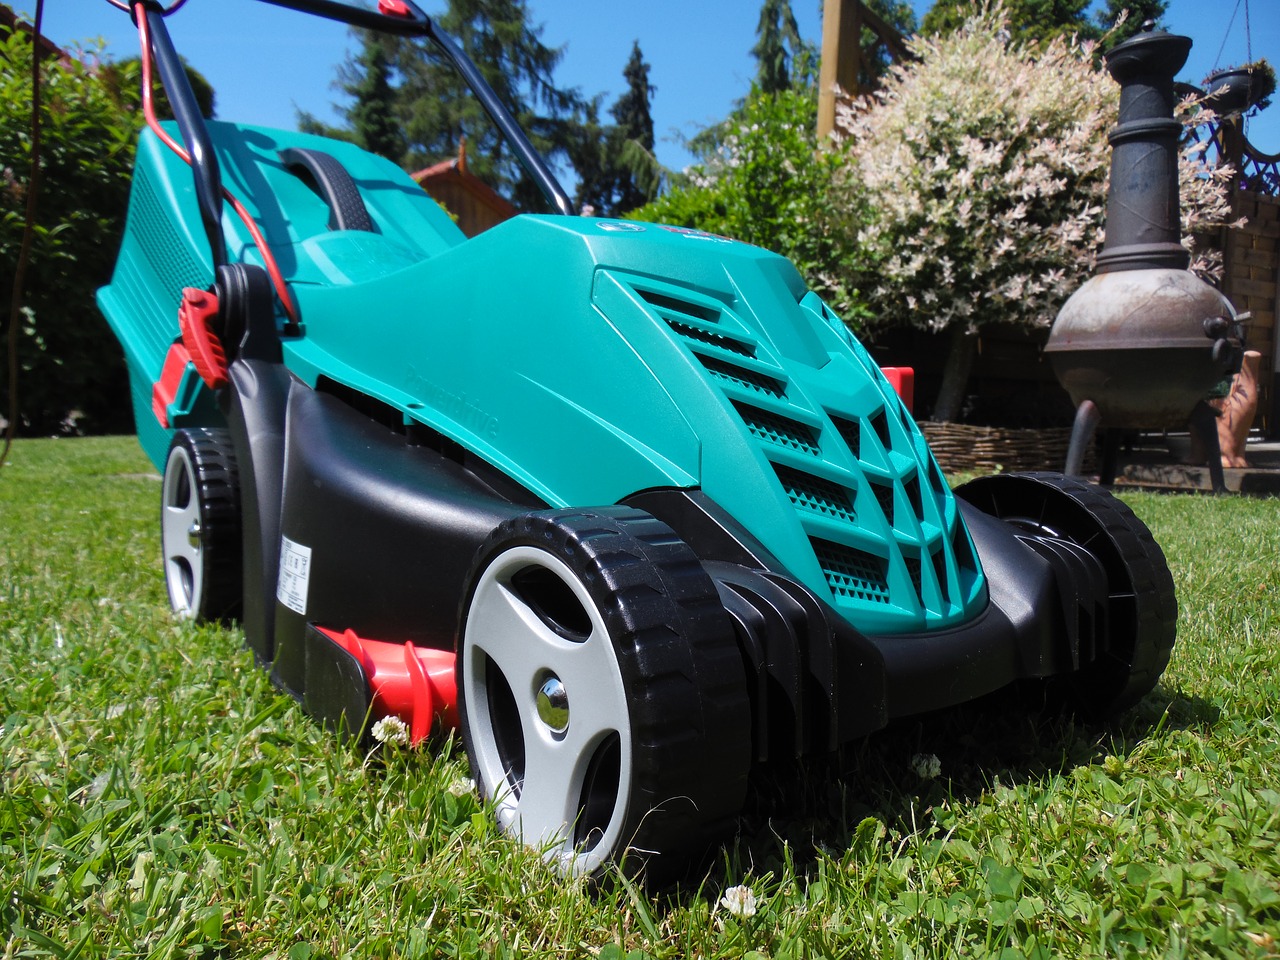 featured image - Corded vs. Cordless Lawn Mower Which is Better